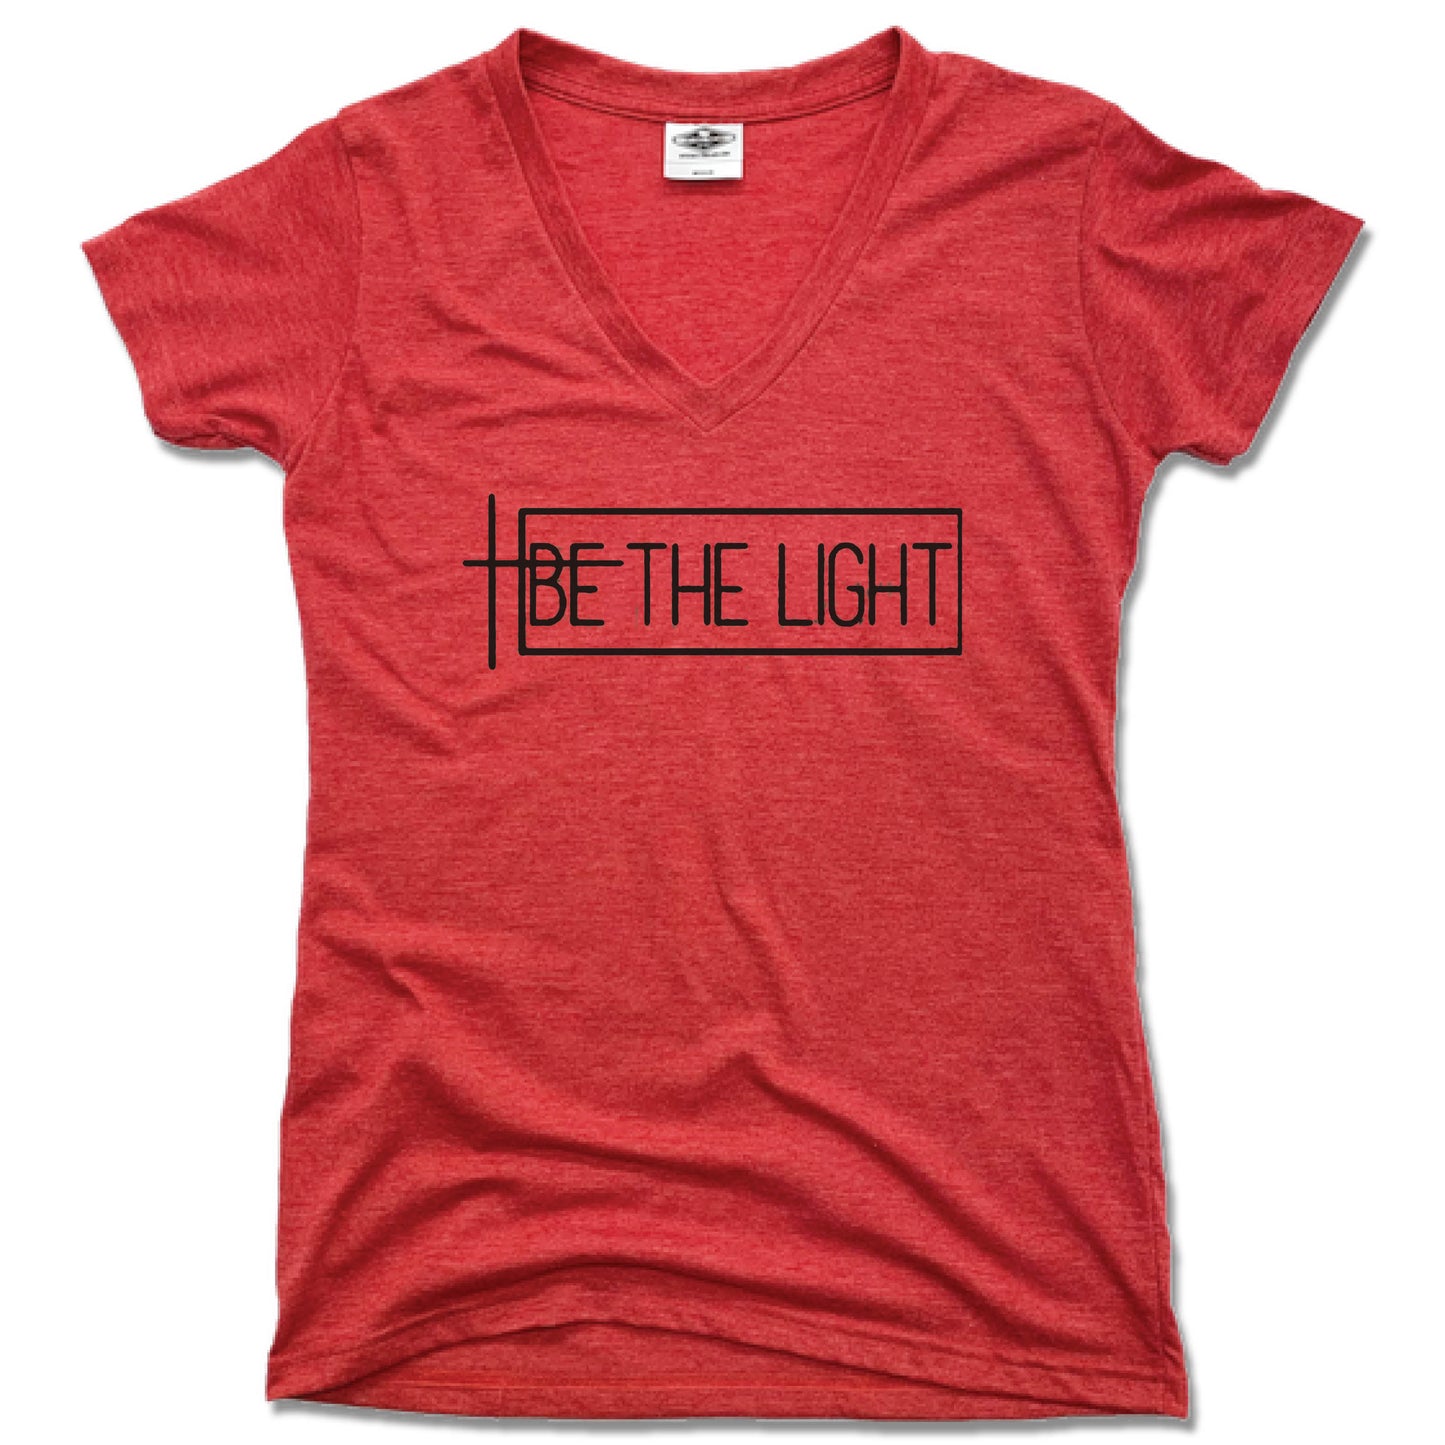 THE SISTER'S CLOSET | LADIES RED V-NECK | BE THE LIGHT